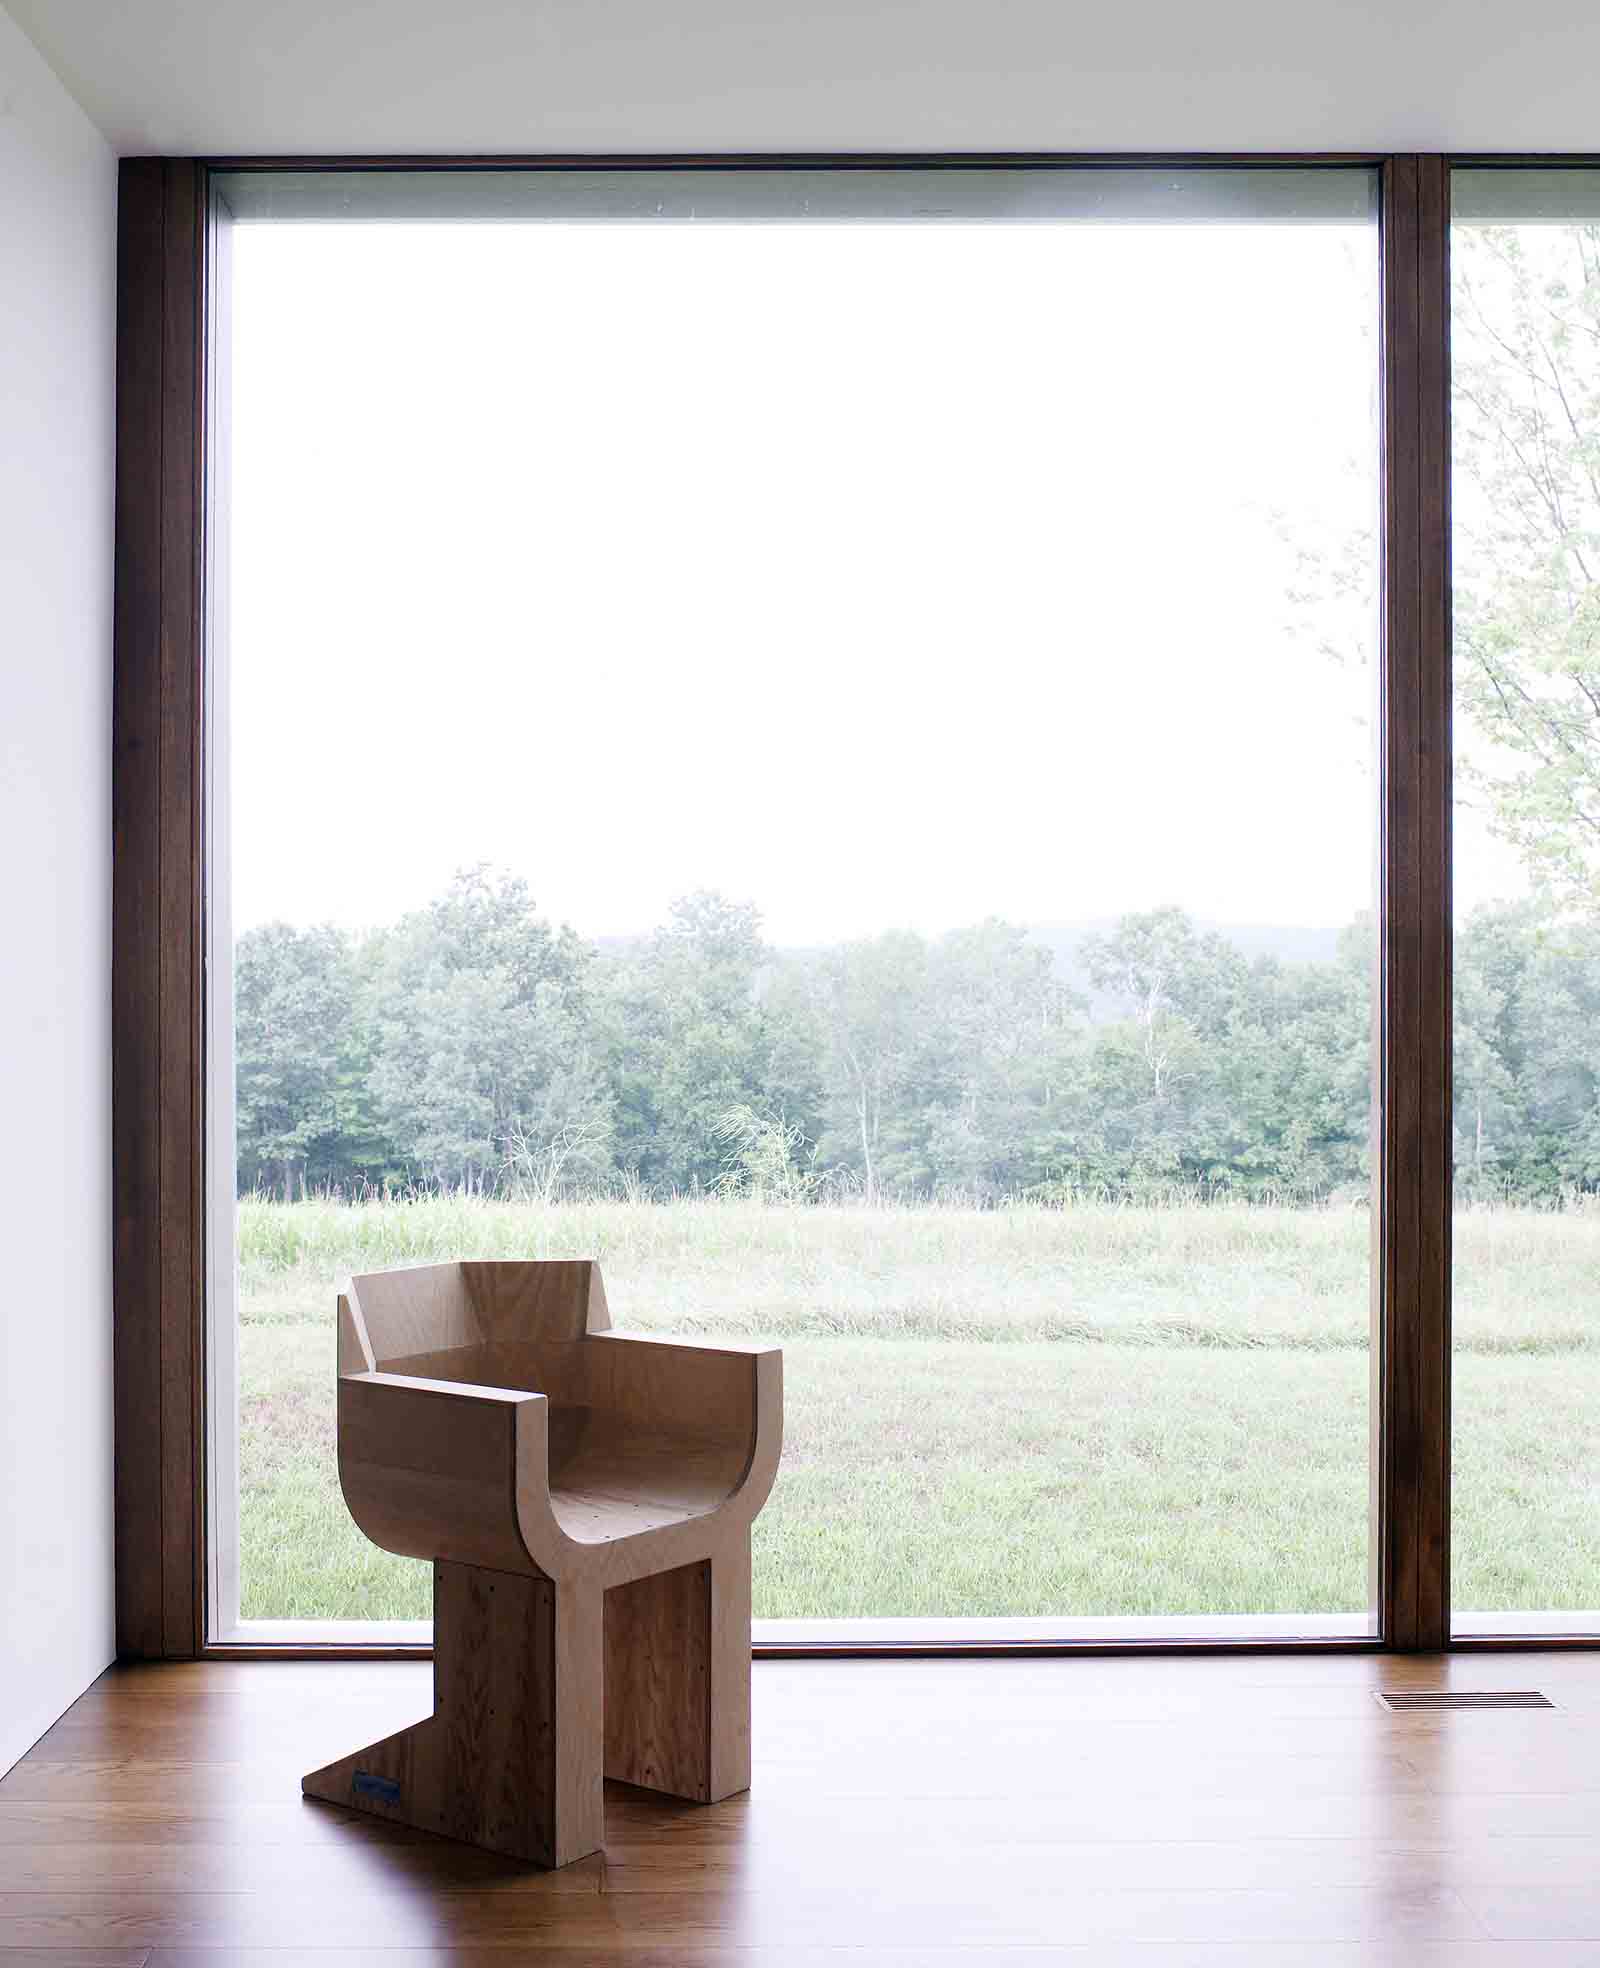 A Rick Owens chair in an upstate NY home by Ai Wei Wei. Image by Richard Powers.jpg